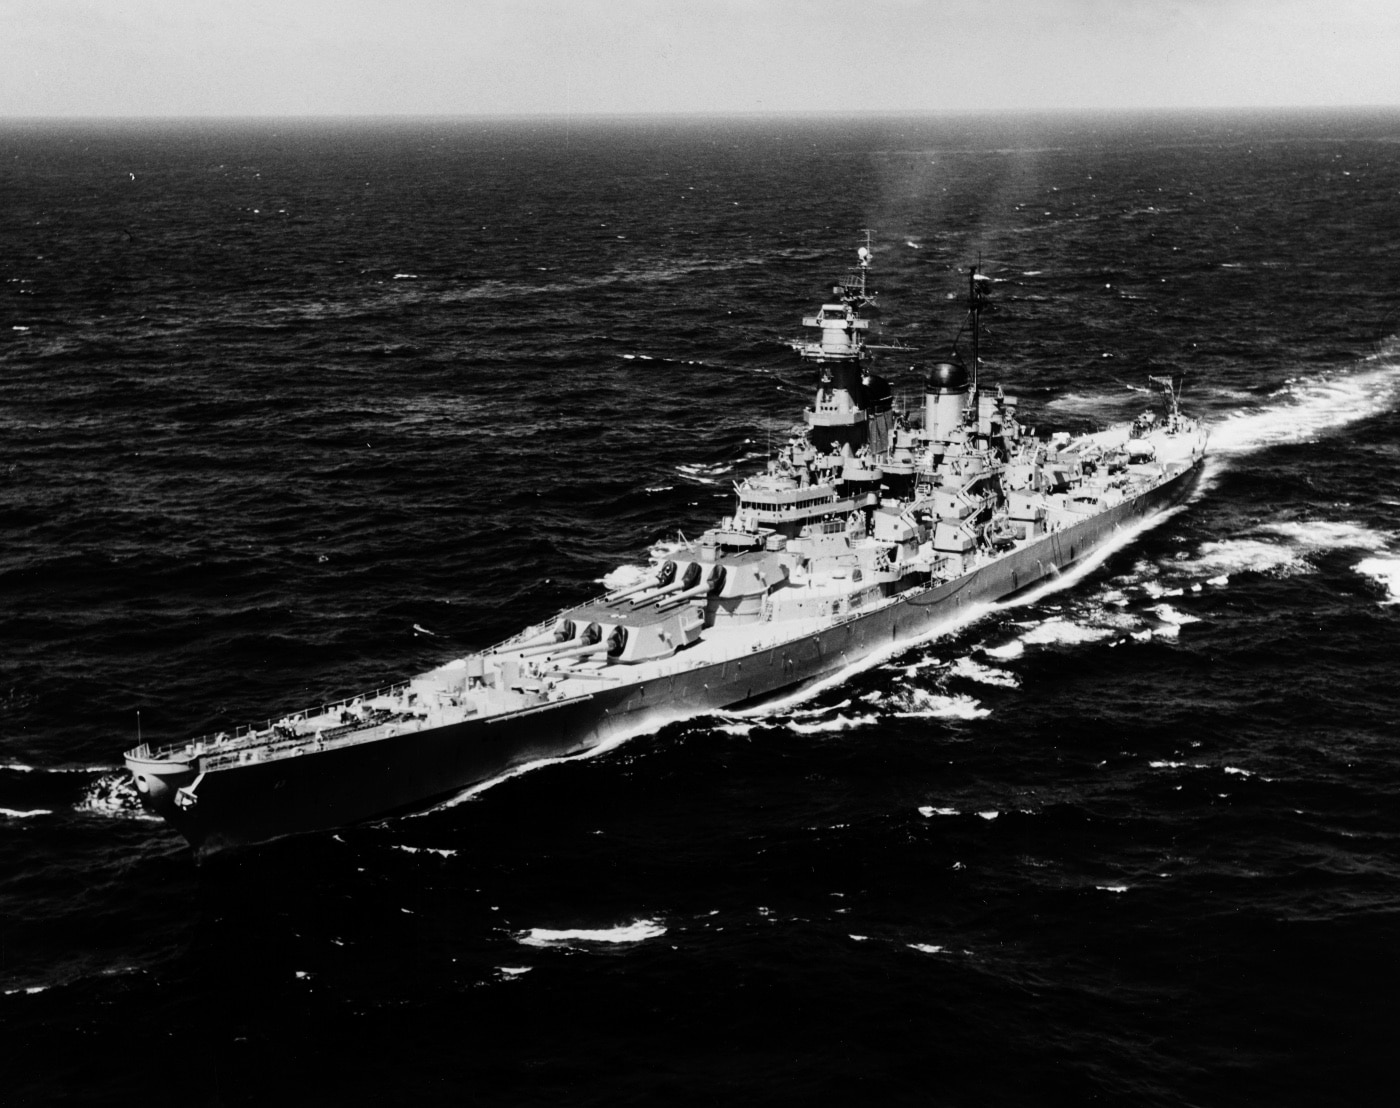 The USS Missouri was an Iowa class battleship that served in the United States Navy. It provided naval gunfire support during amphibious operations and carries anti-ship missiles.